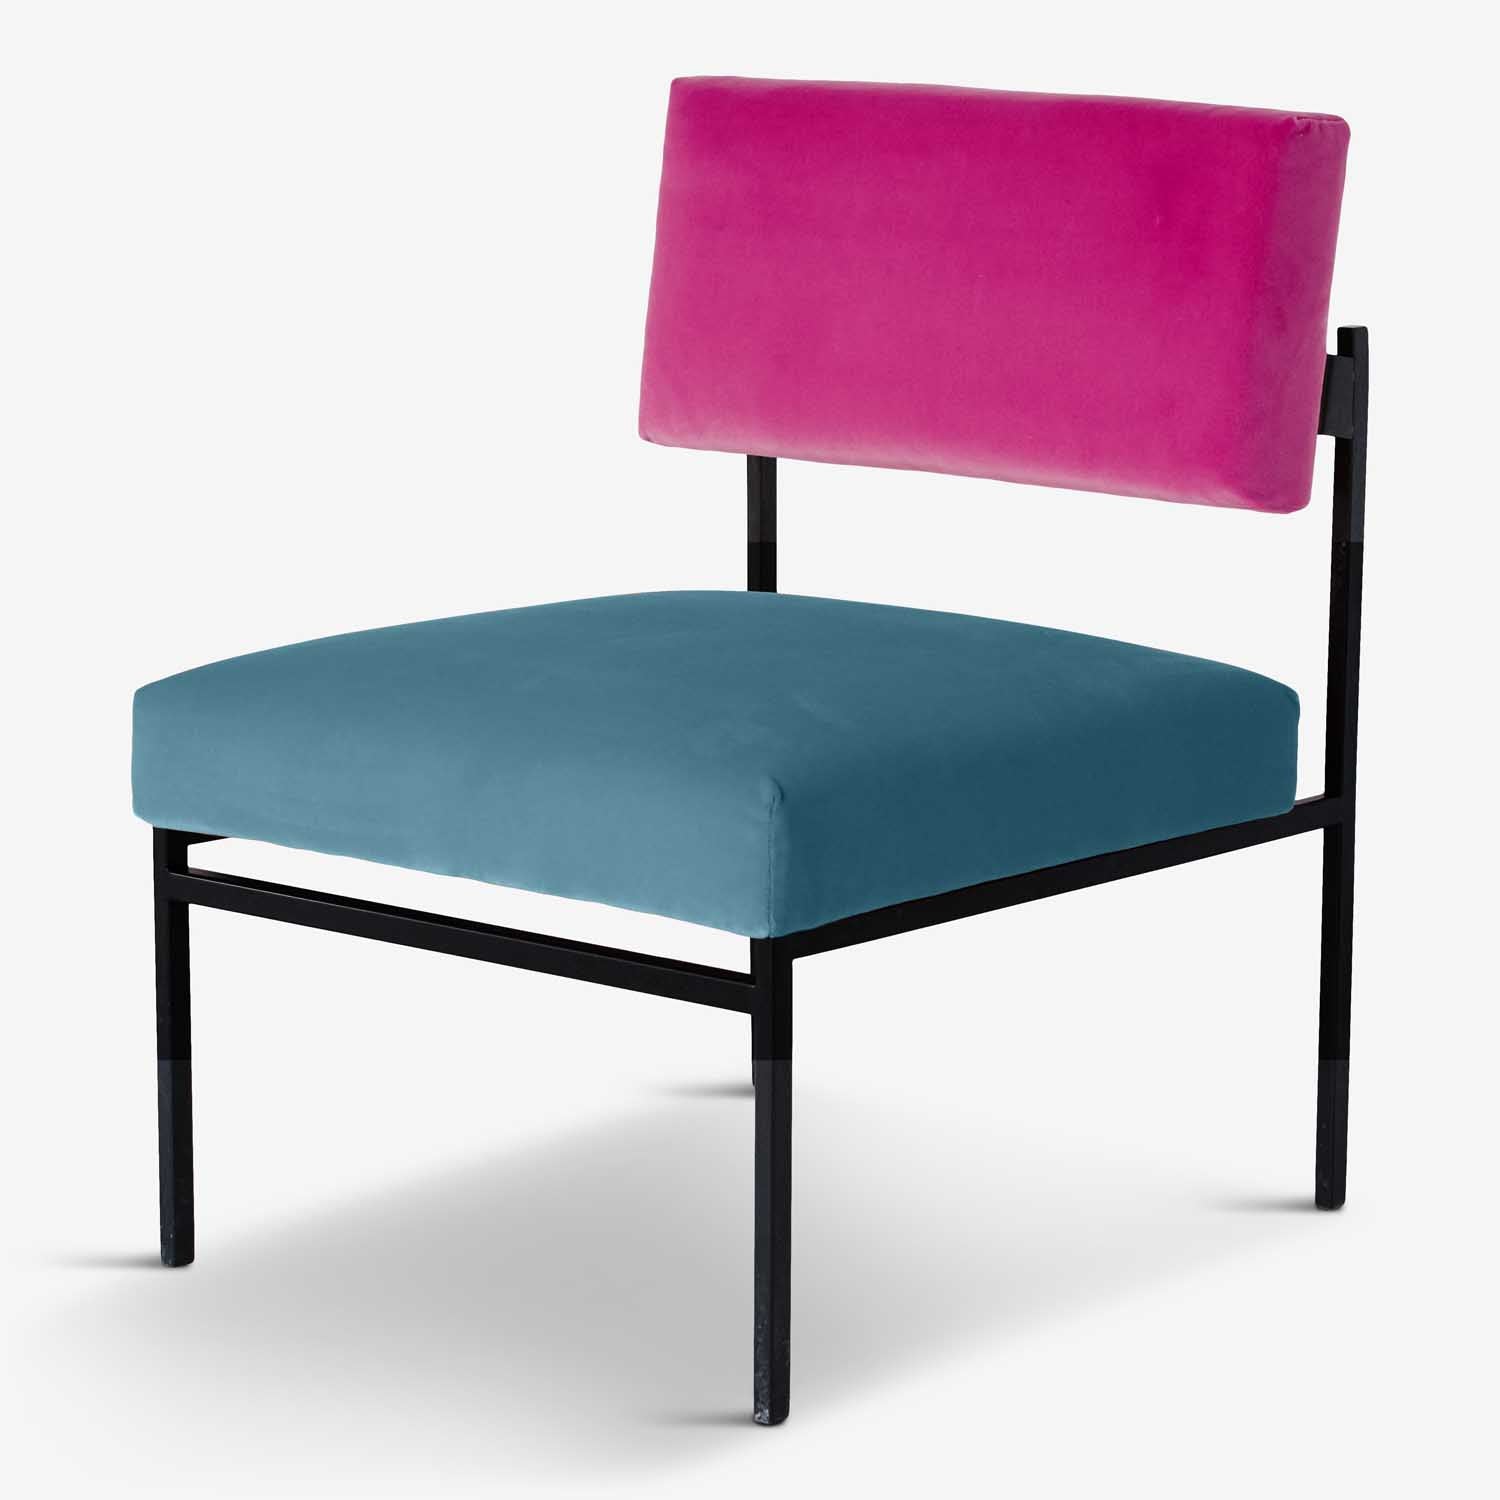 modern lounge chair for intimate spaces pink and blue